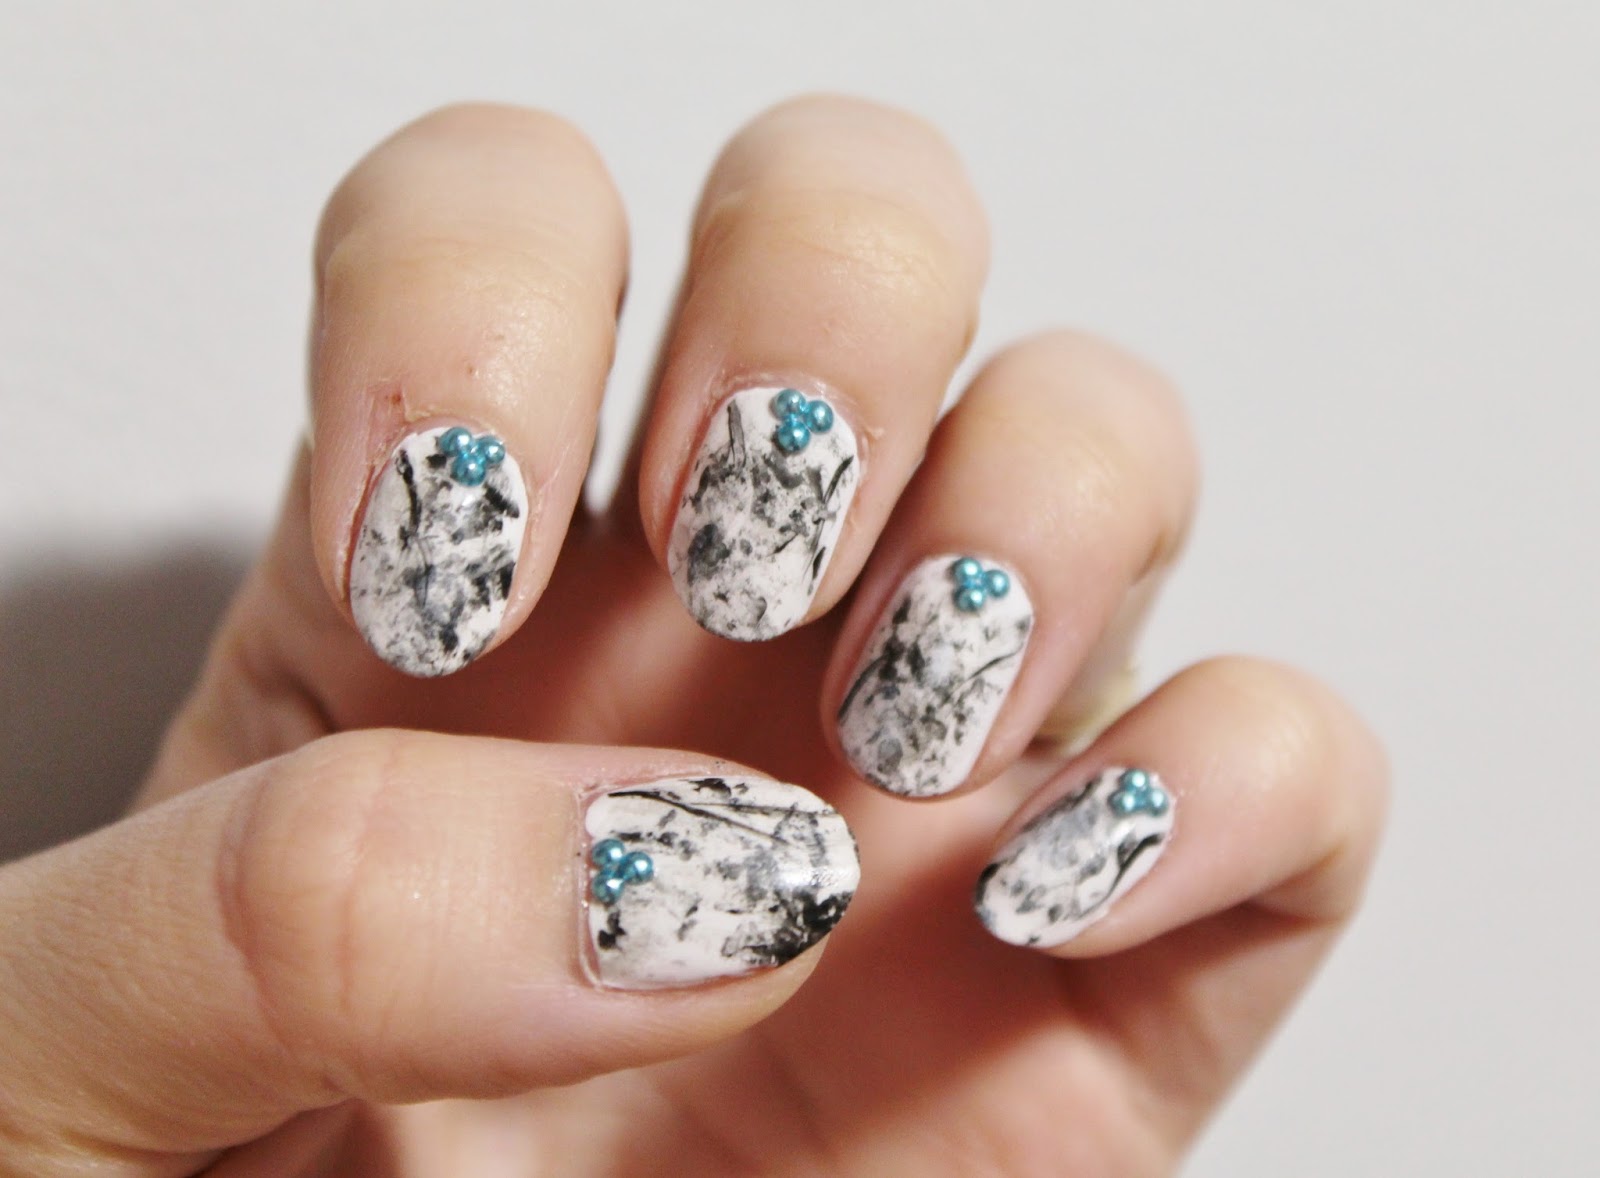 4. Marble Nail Art - wide 4